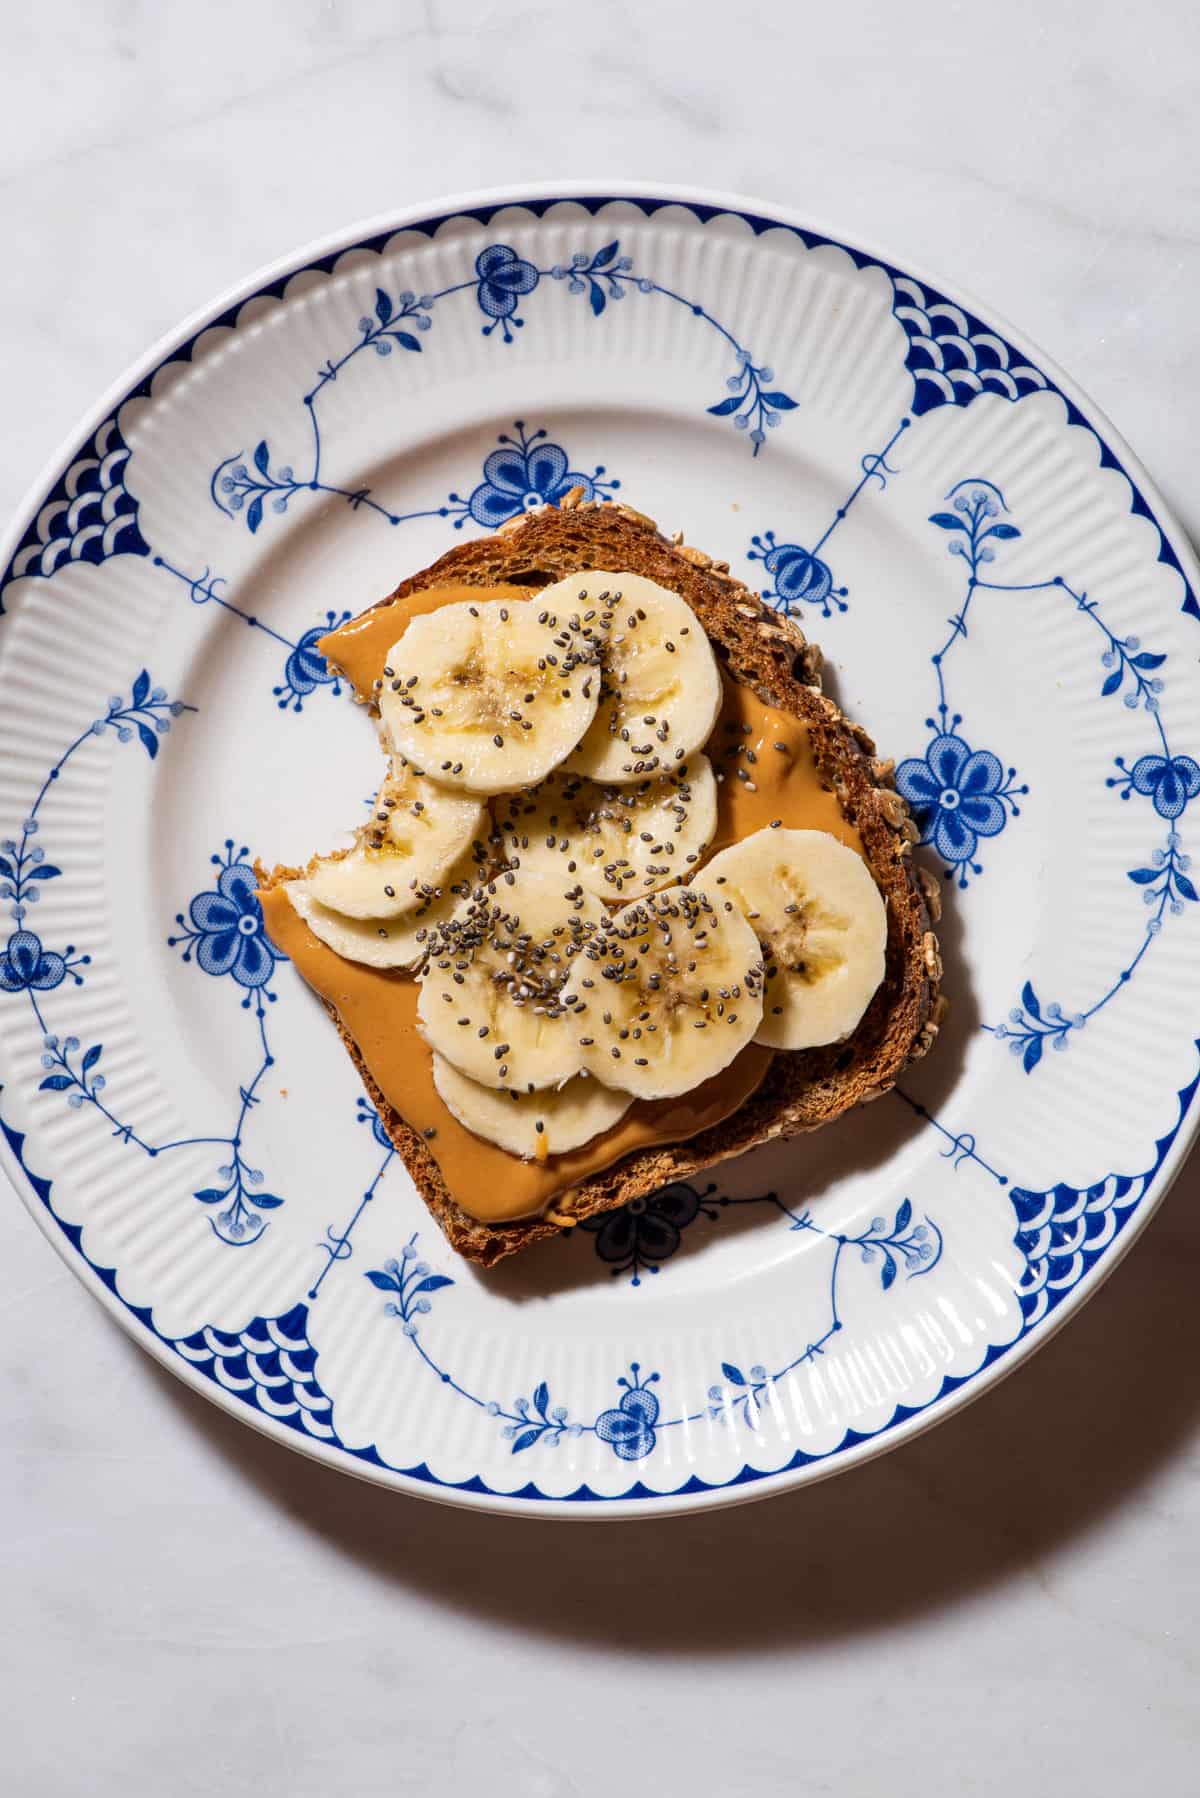 Peanut butter toast with banana slices and chia seeds.